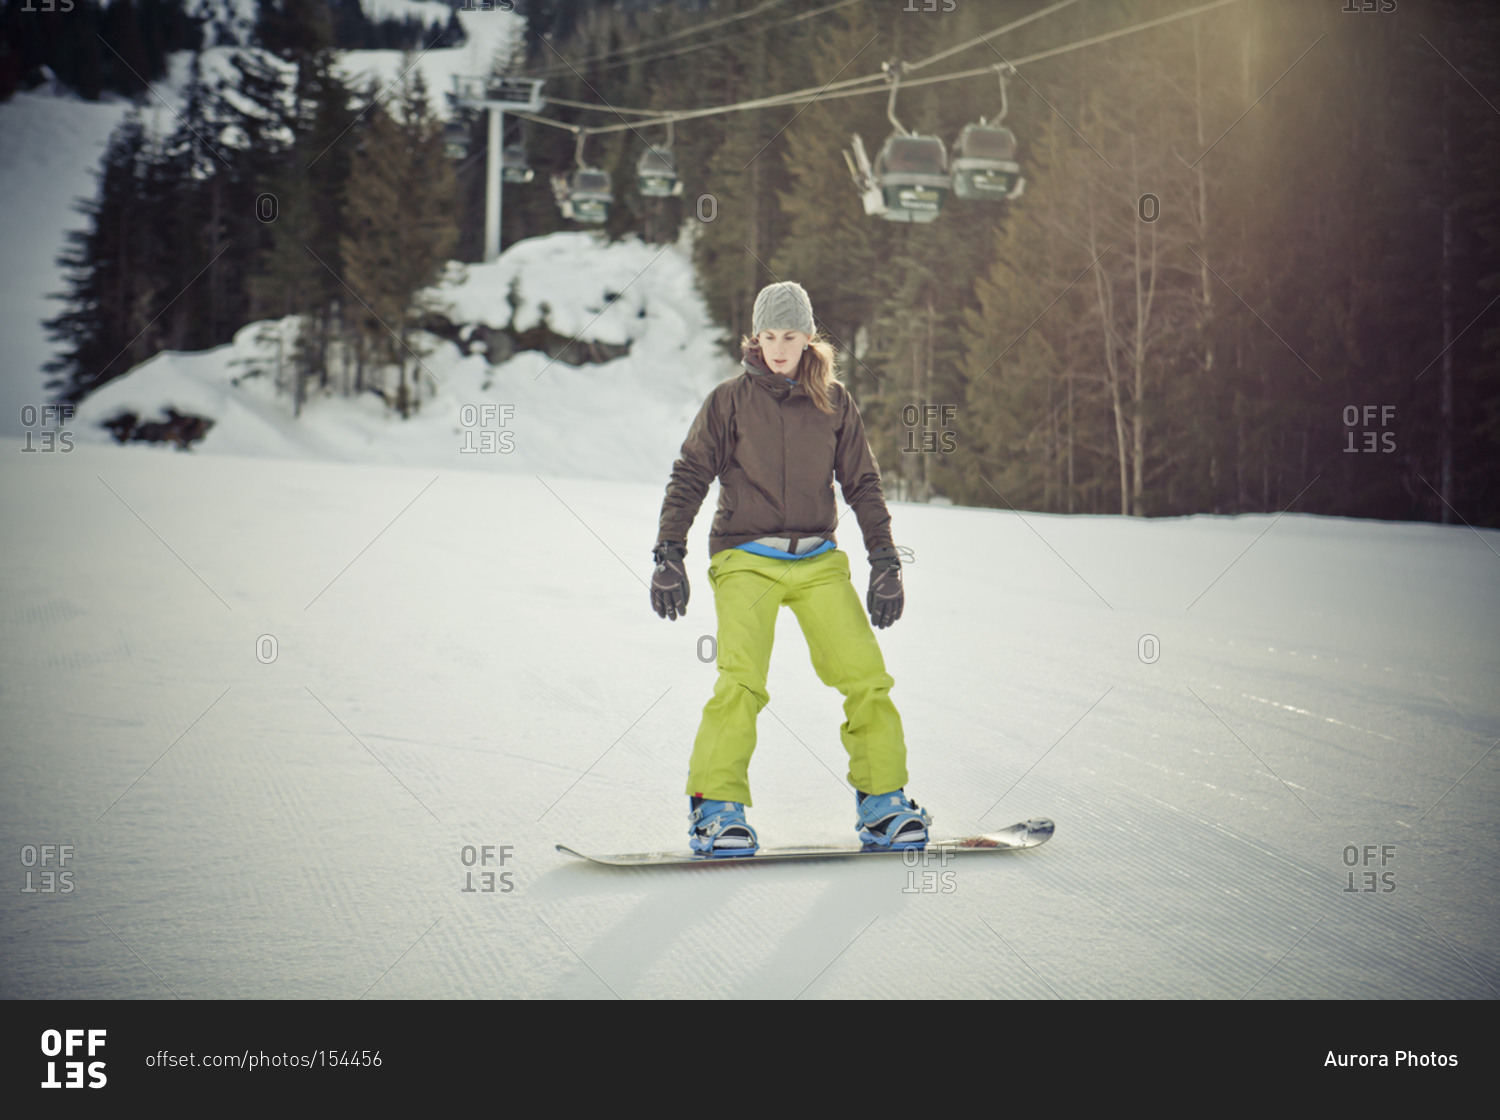 A young woman snowboarding on Whistler Mountain